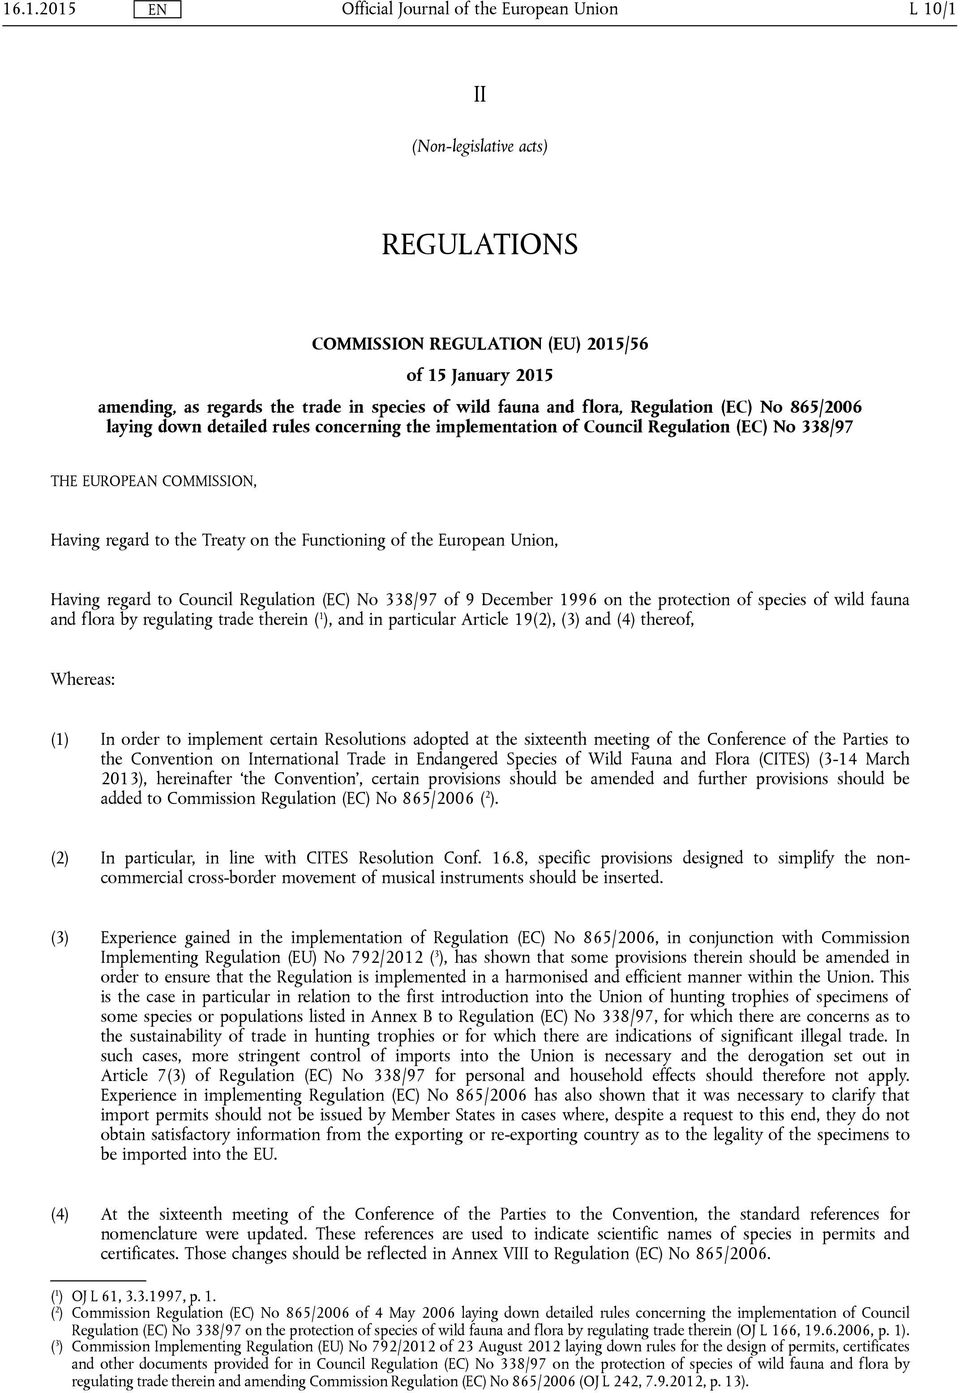 Having regard to Council Regulation (EC) No 338/97 of 9 December 1996 on the protection of species of wild fauna and flora by regulating trade therein ( 1 ), and in particular Article 19(2), (3) and